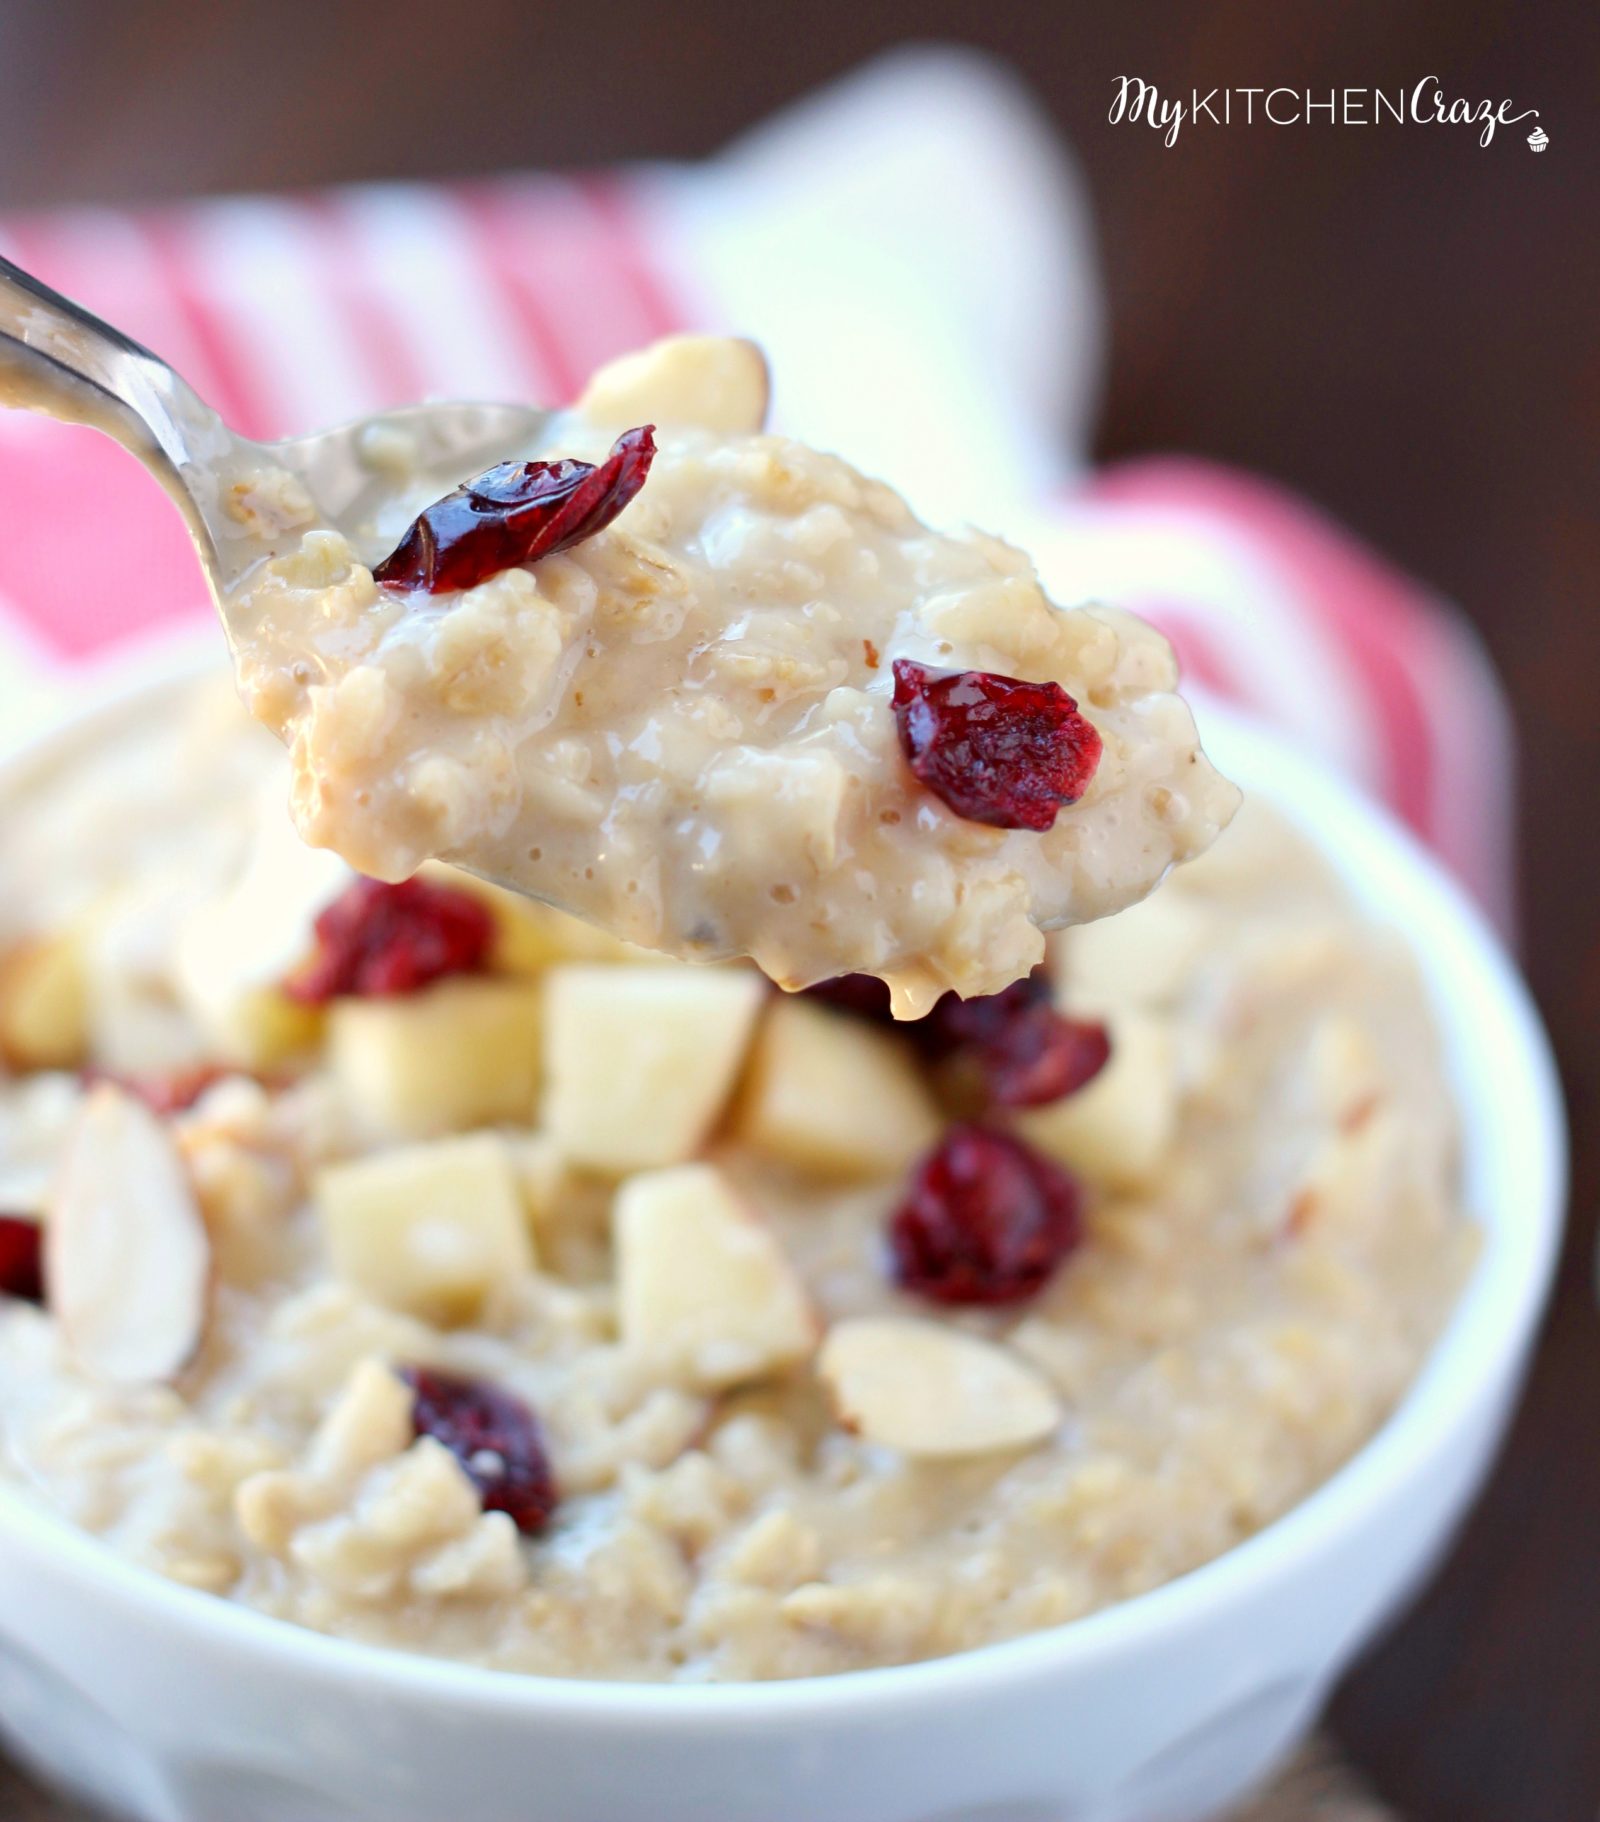 Cranberry Apple Oatmeal ~ mykitchencraze.com ~ Enjoy this creamy delicious oatmeal loaded with dried cranberries and apples. Breakfast never tasted so good.